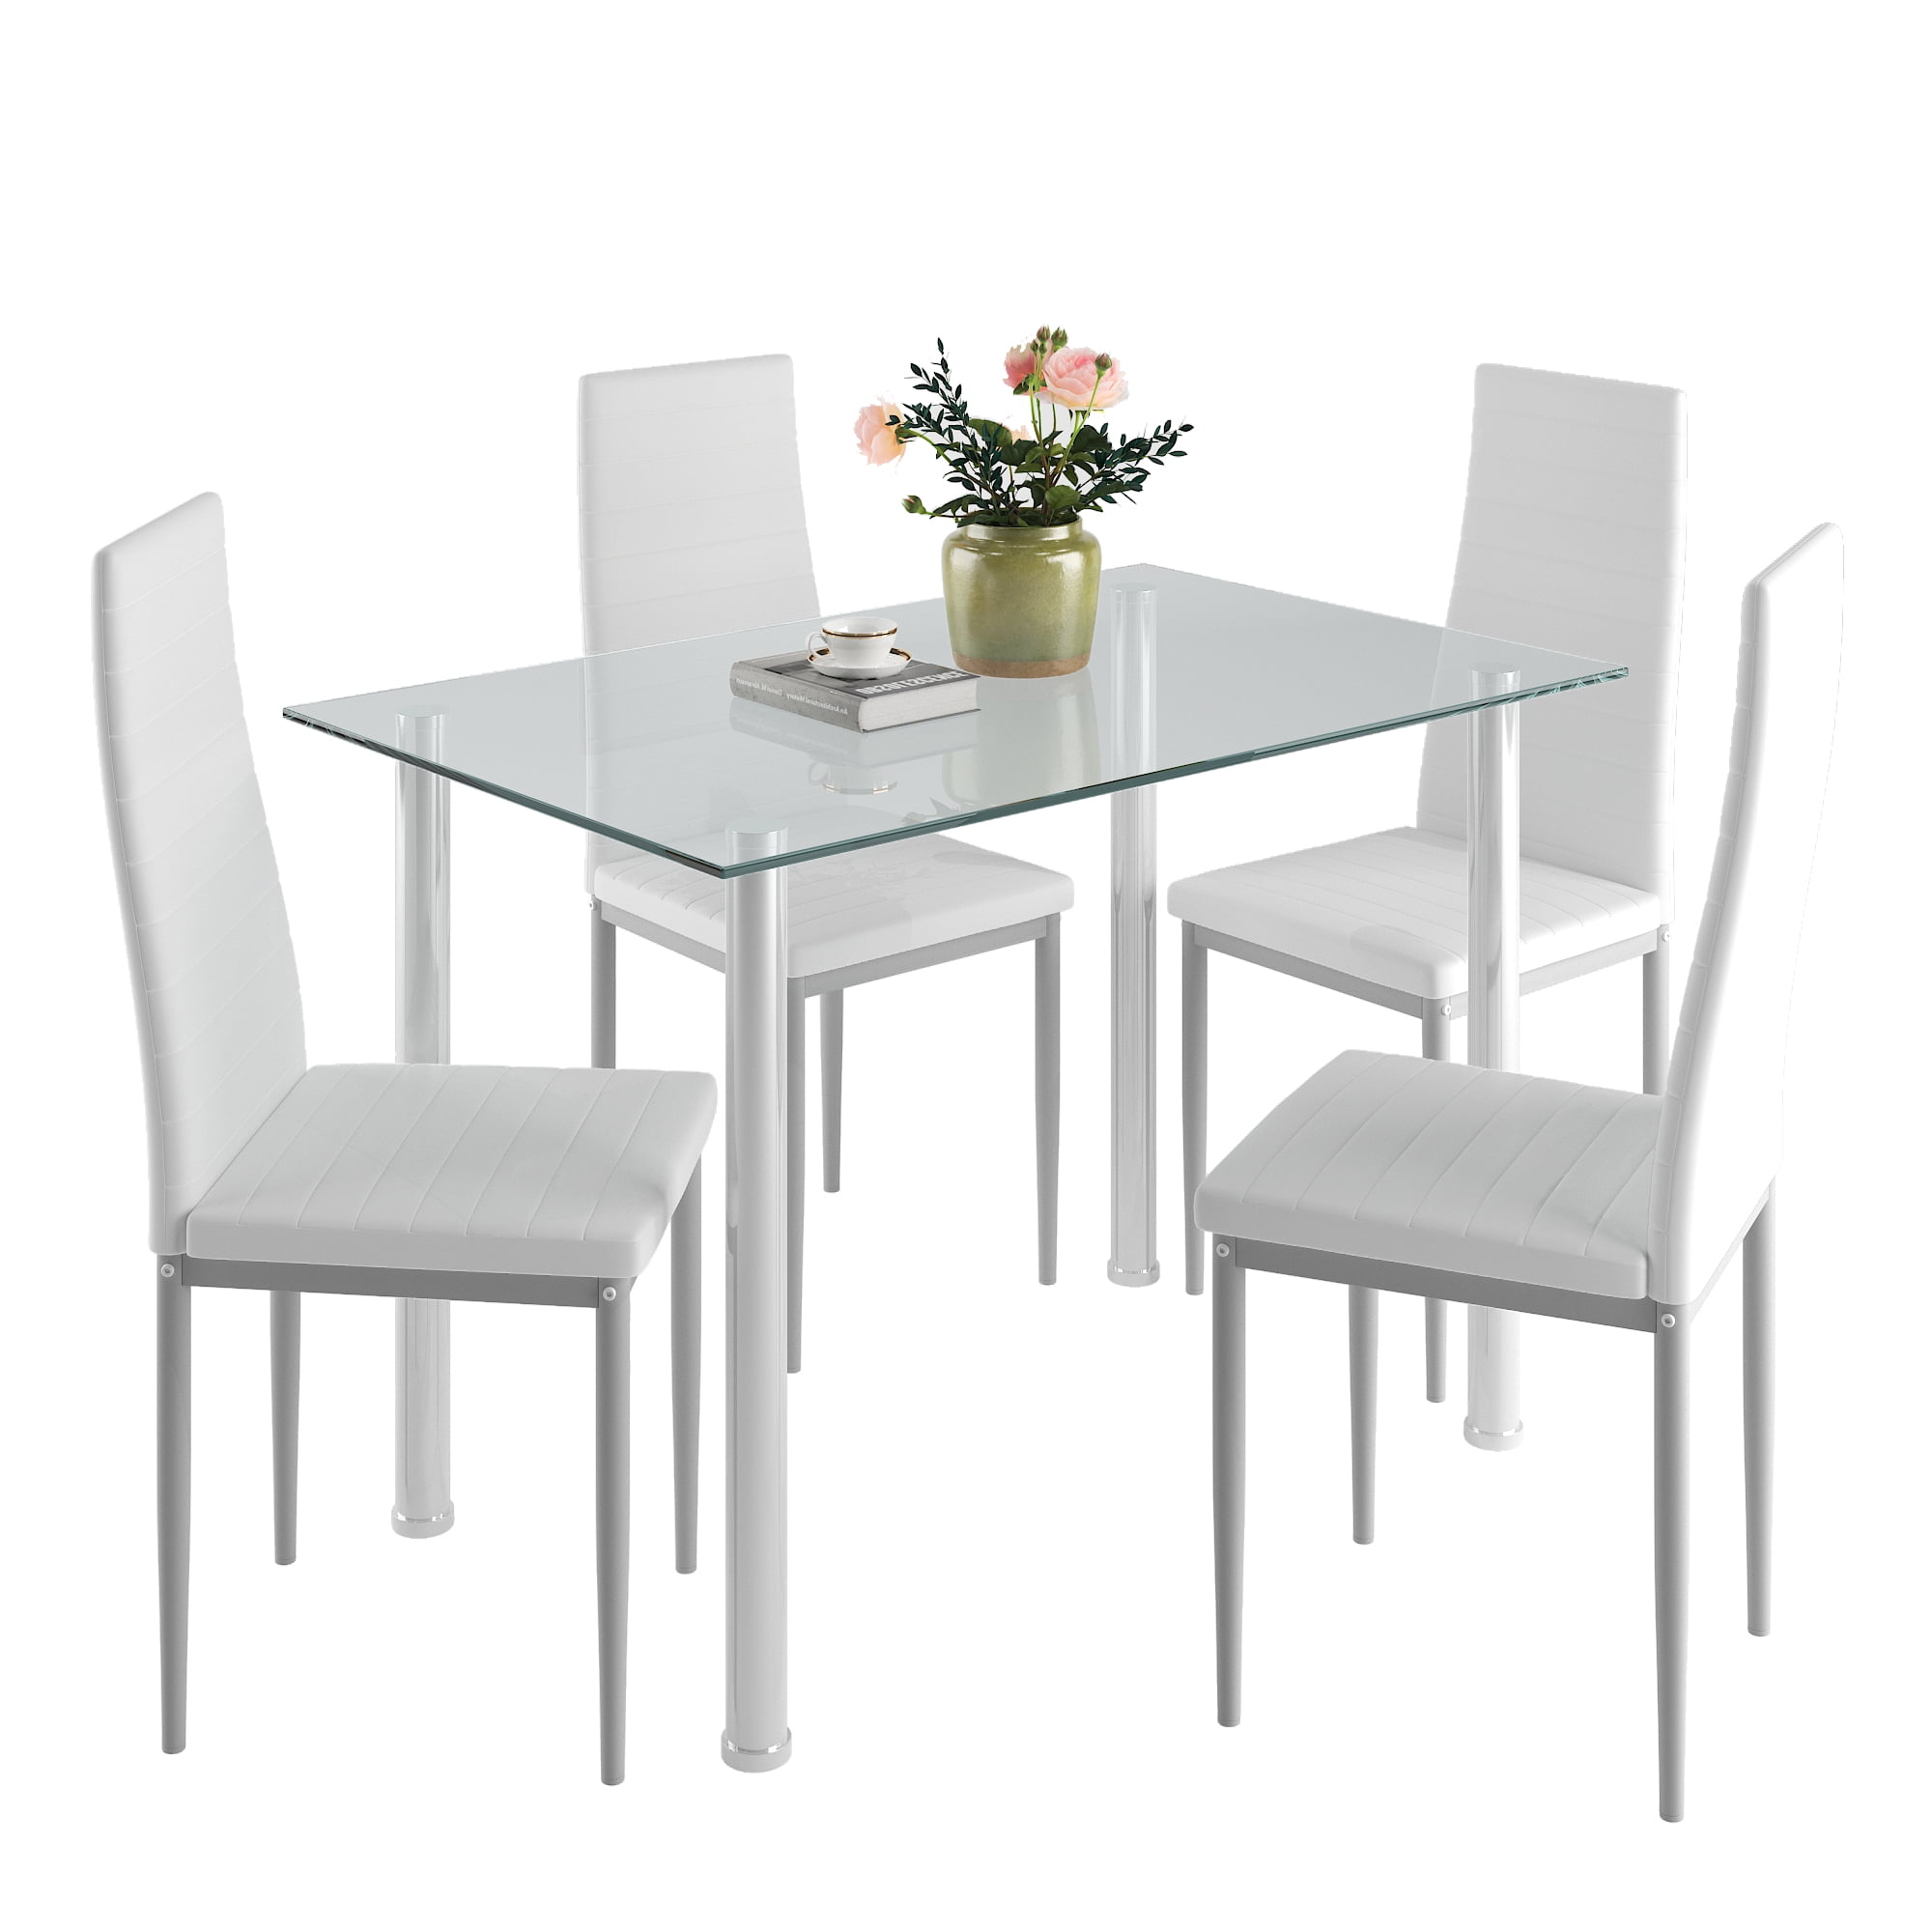 PAPROOS Dining Table Set for 4, Modern 5-Piece Kitchen Table Set with Faux Marble Top and Velvet Upholstery Chairs, Heavy Duty Dinette Sets for Breakfast Nook, Dining Room Table and Chairs, Gray